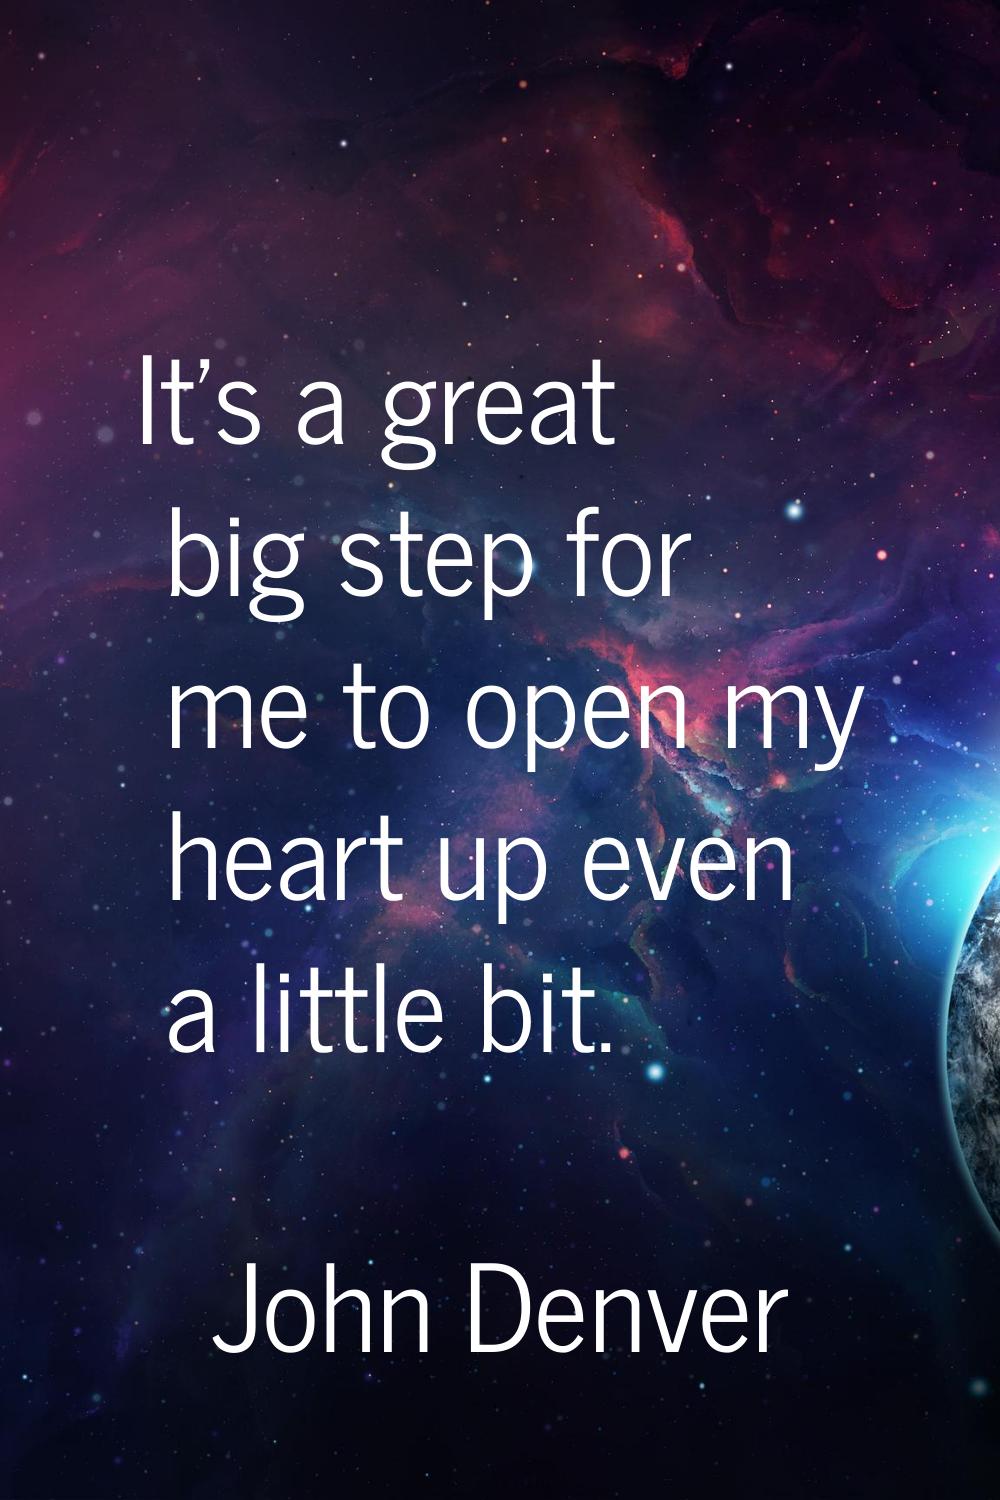 It's a great big step for me to open my heart up even a little bit.